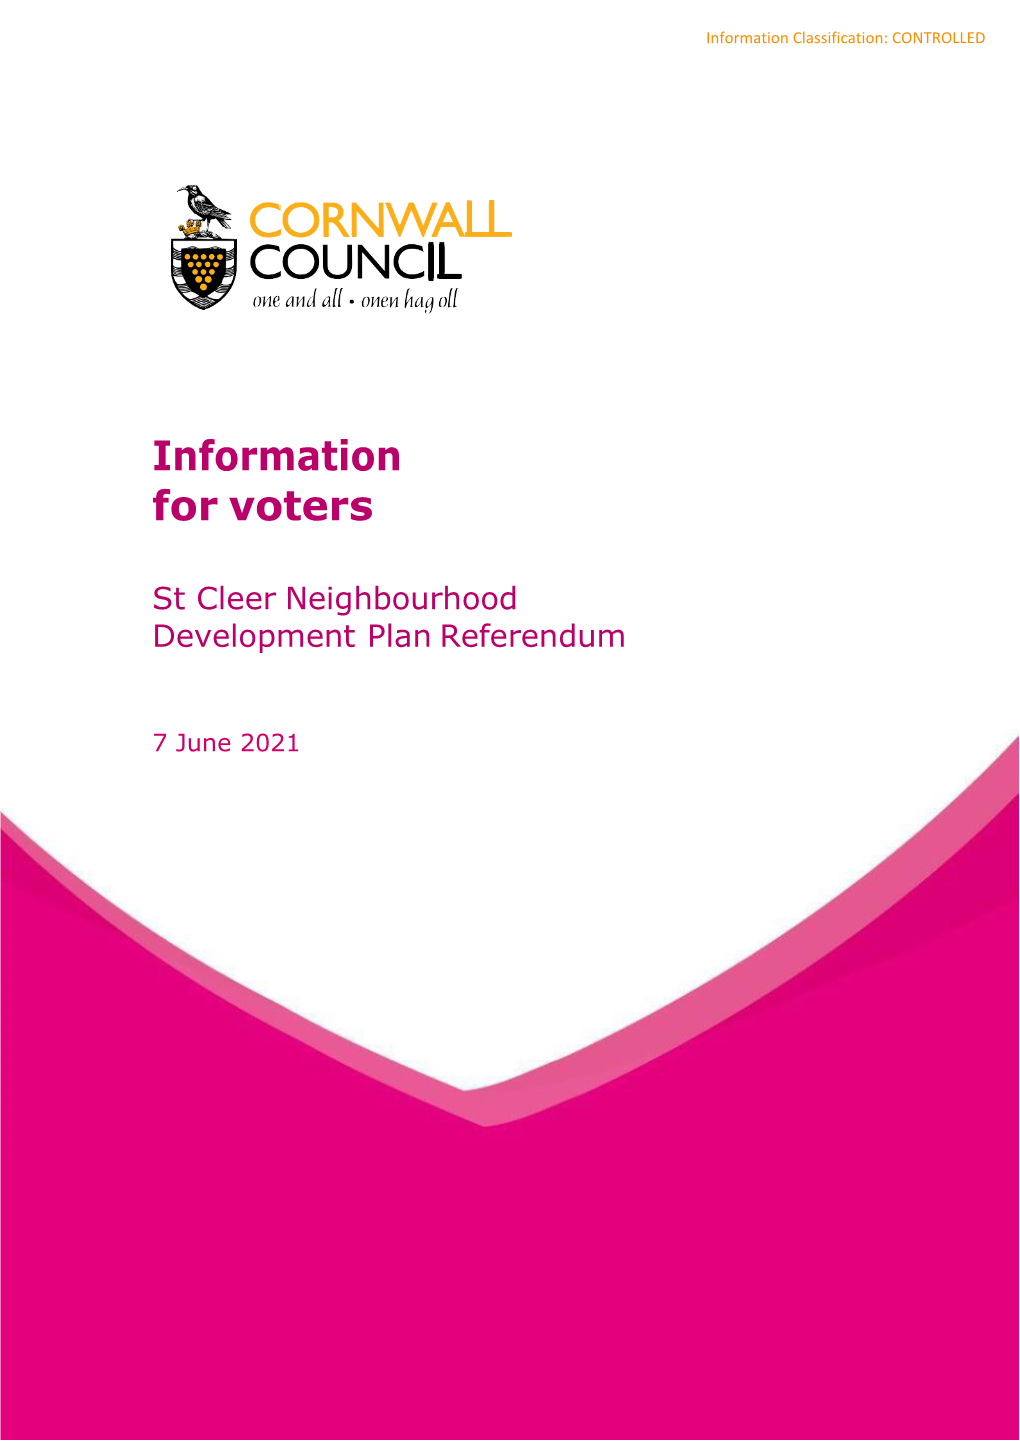 Information for Voters on the St Cleer Neighbourhood Plan Referendum